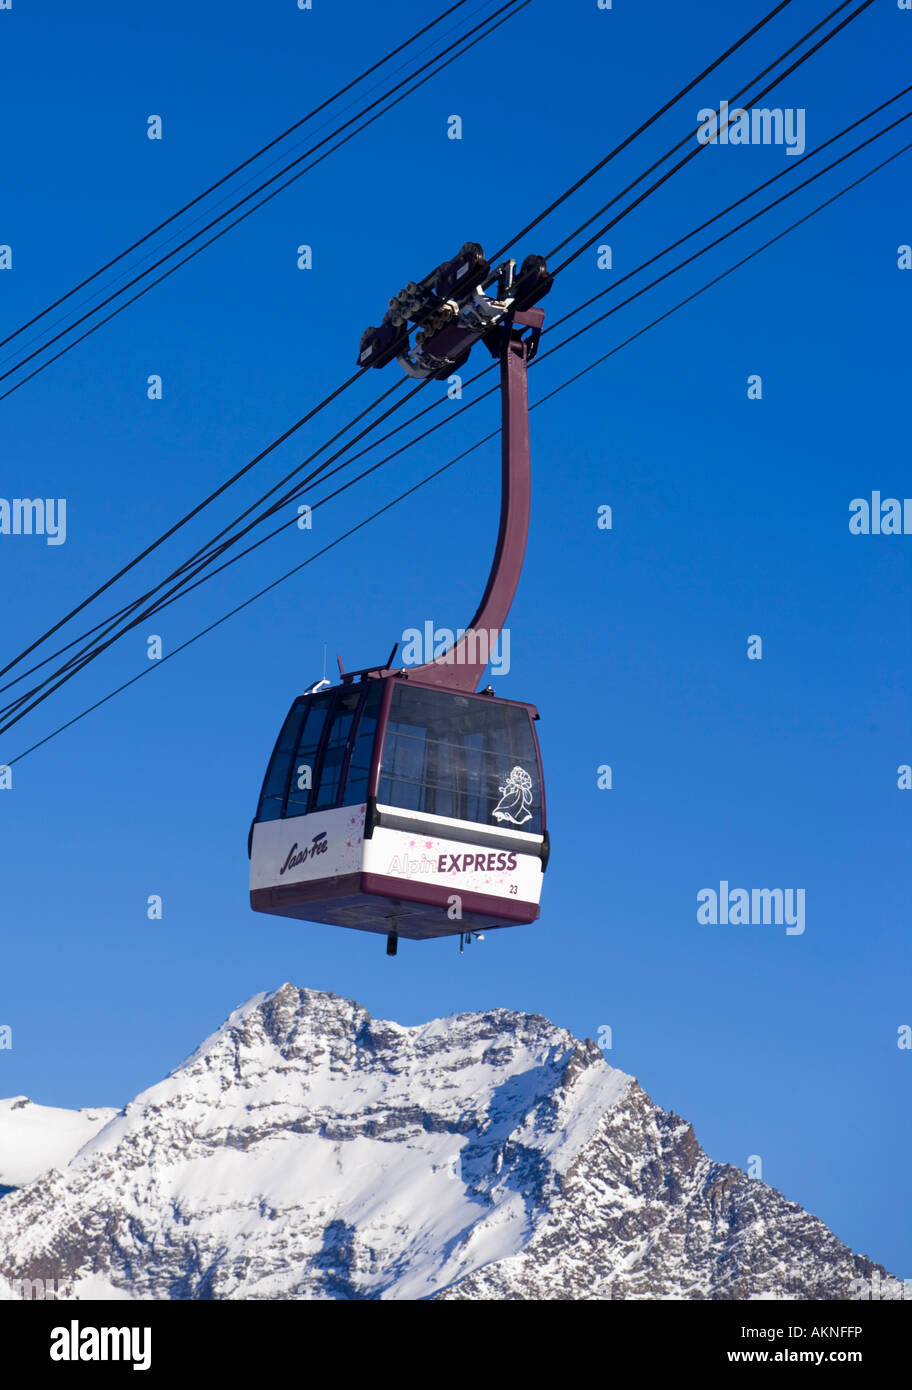 Gondola of the Alpin Express tri cable endless ropeway system Saas Fee Valais Switzerland Stock Photo